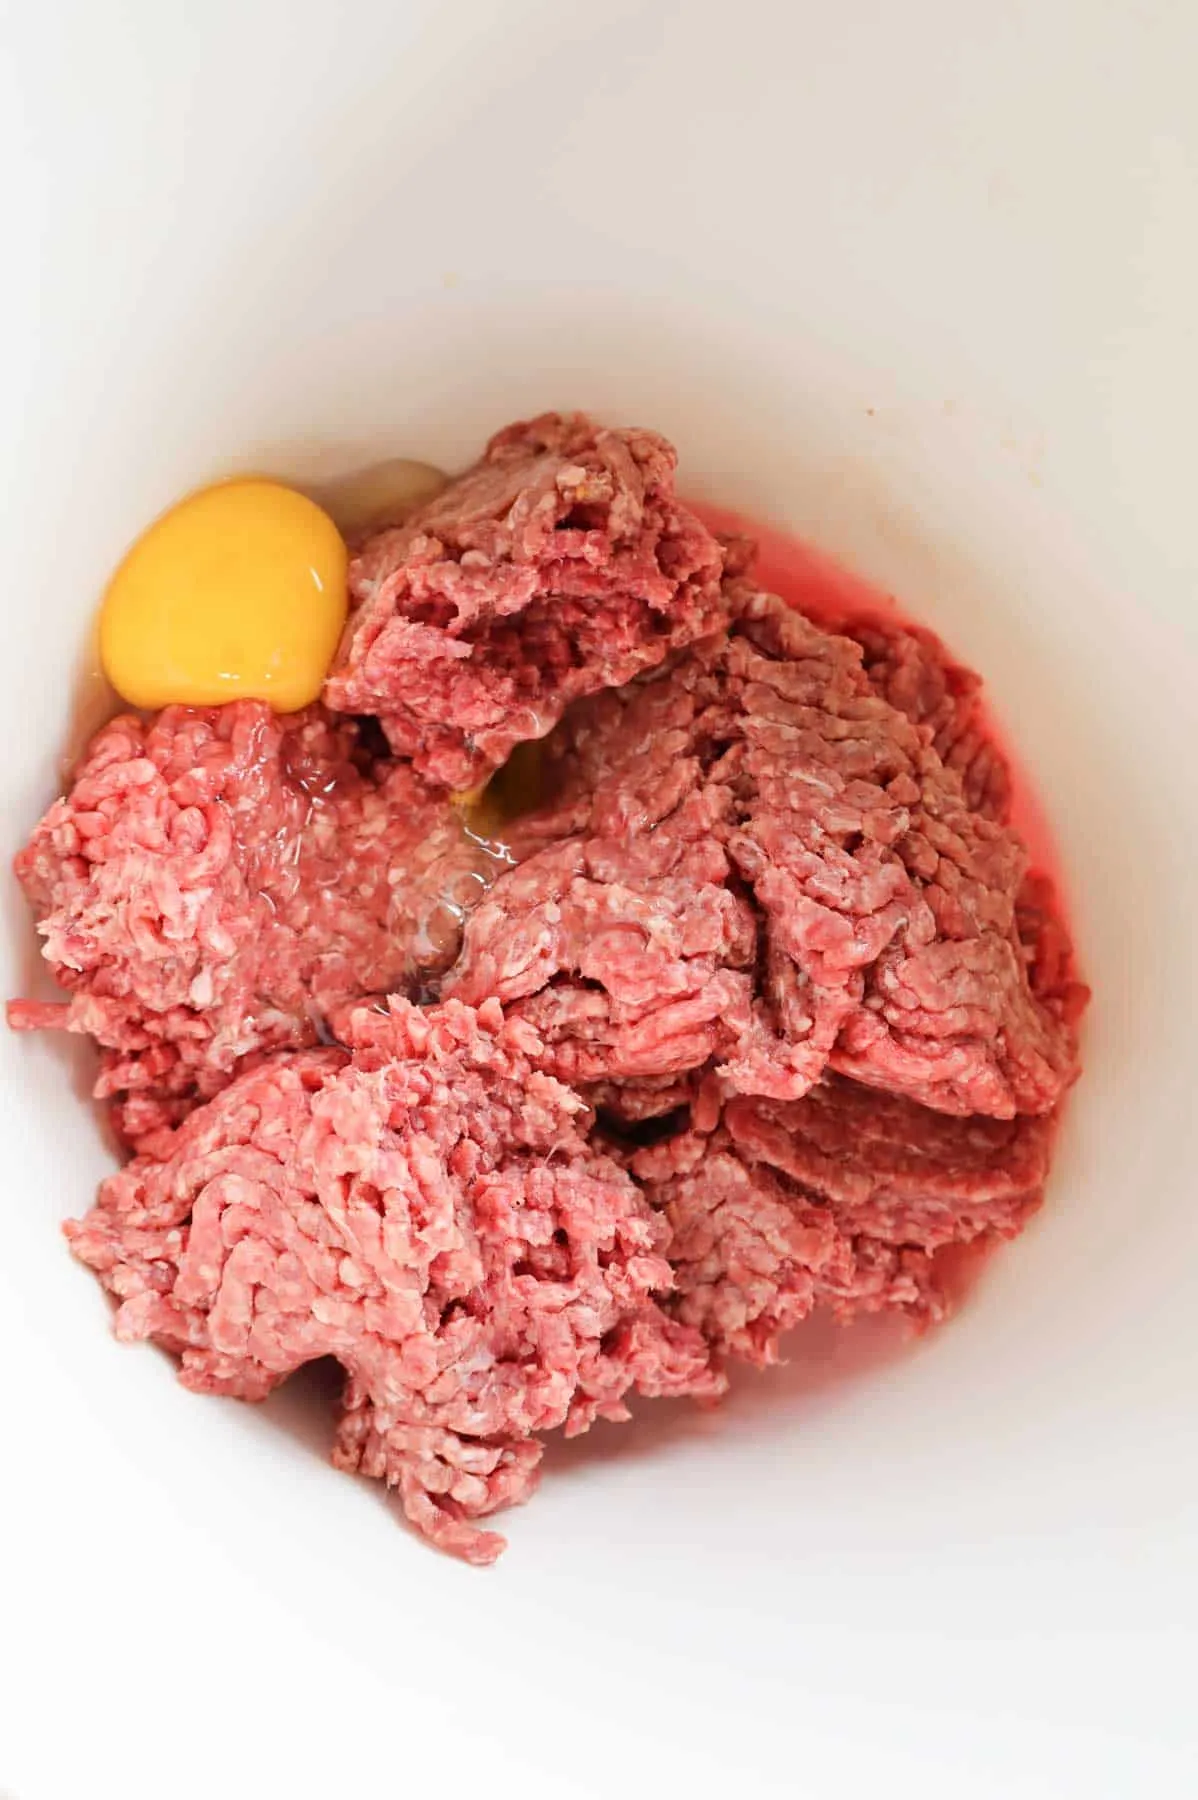 eggs, milk and lean ground beef in a bowl